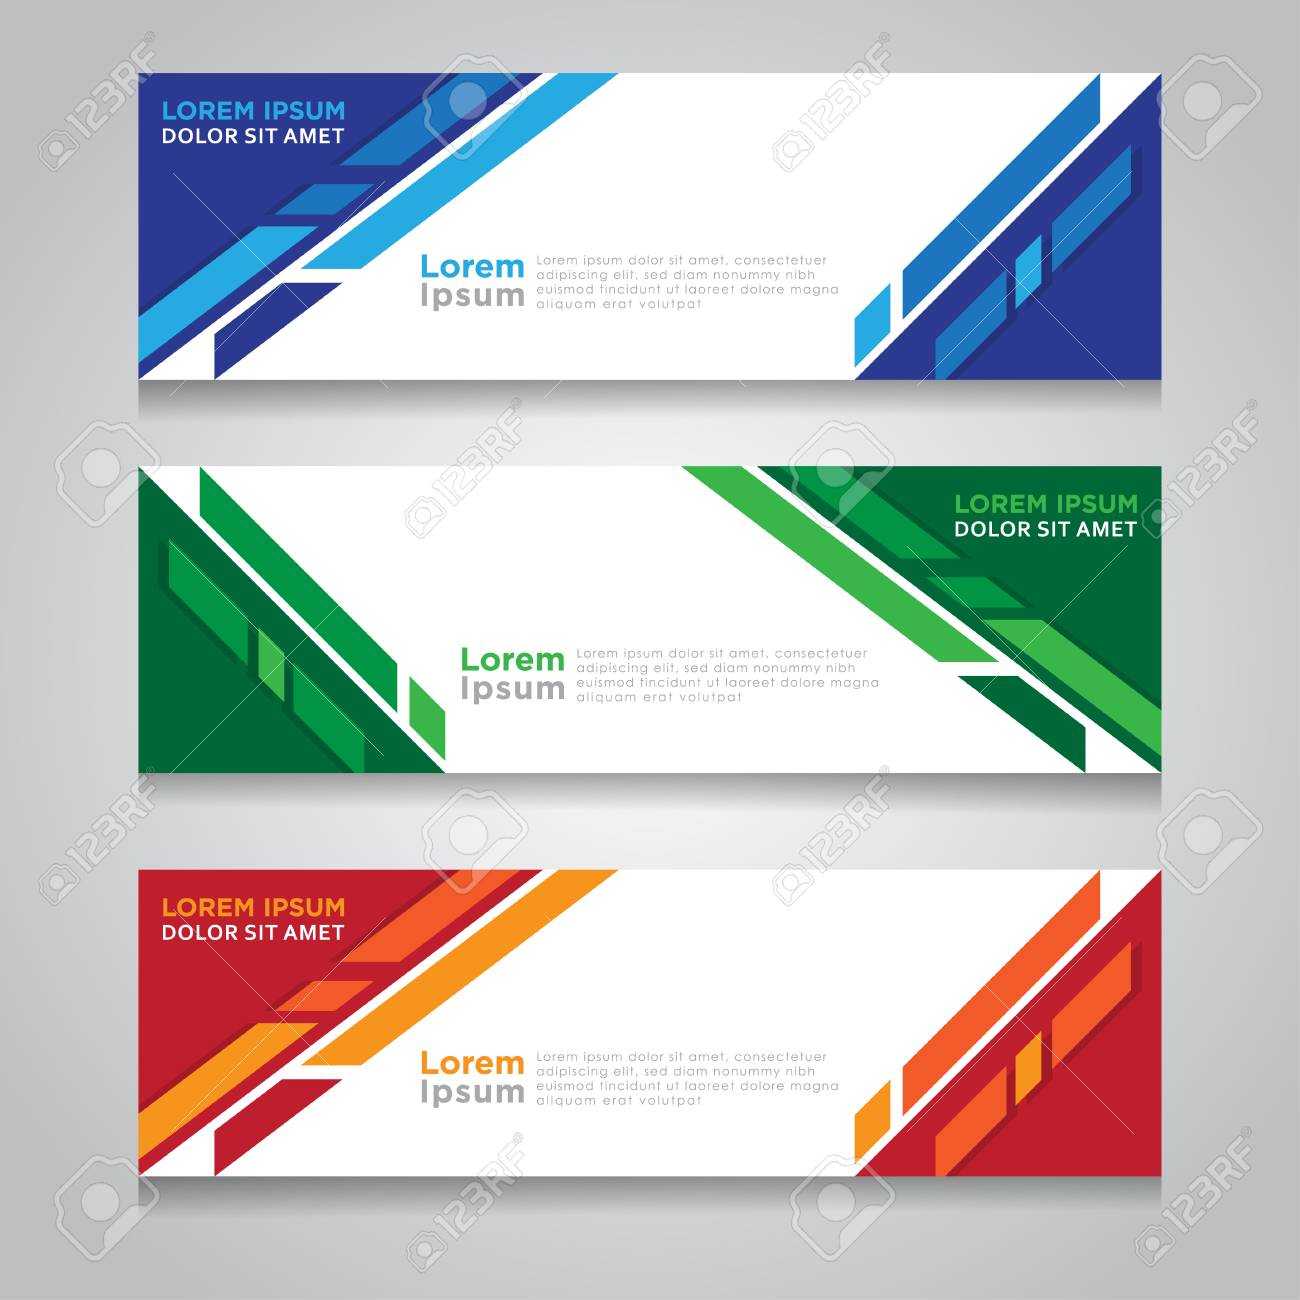 Vector Abstract Design Web Banner Template. Web Design Elements.. Within Website Banner Design Templates